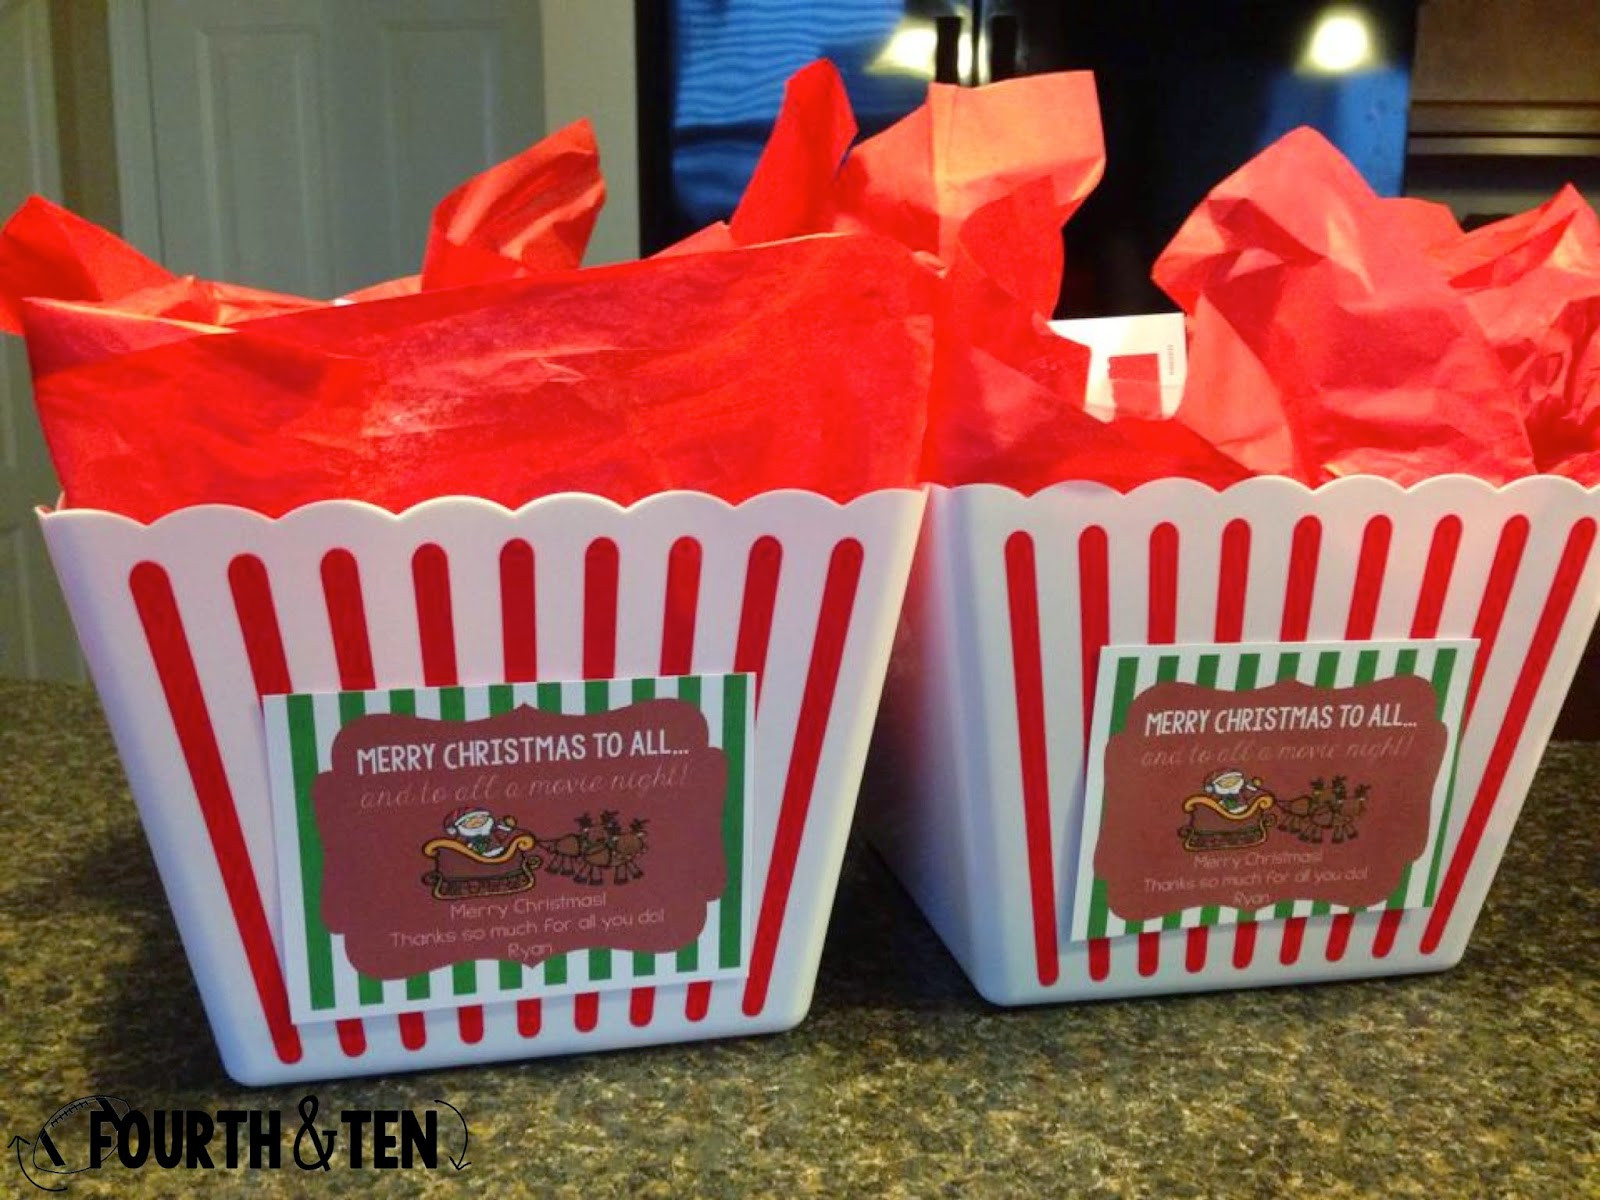 DIY Christmas Gifts For Coworkers
 Fourth and Ten Homemade Christmas Gifts for Coworkers